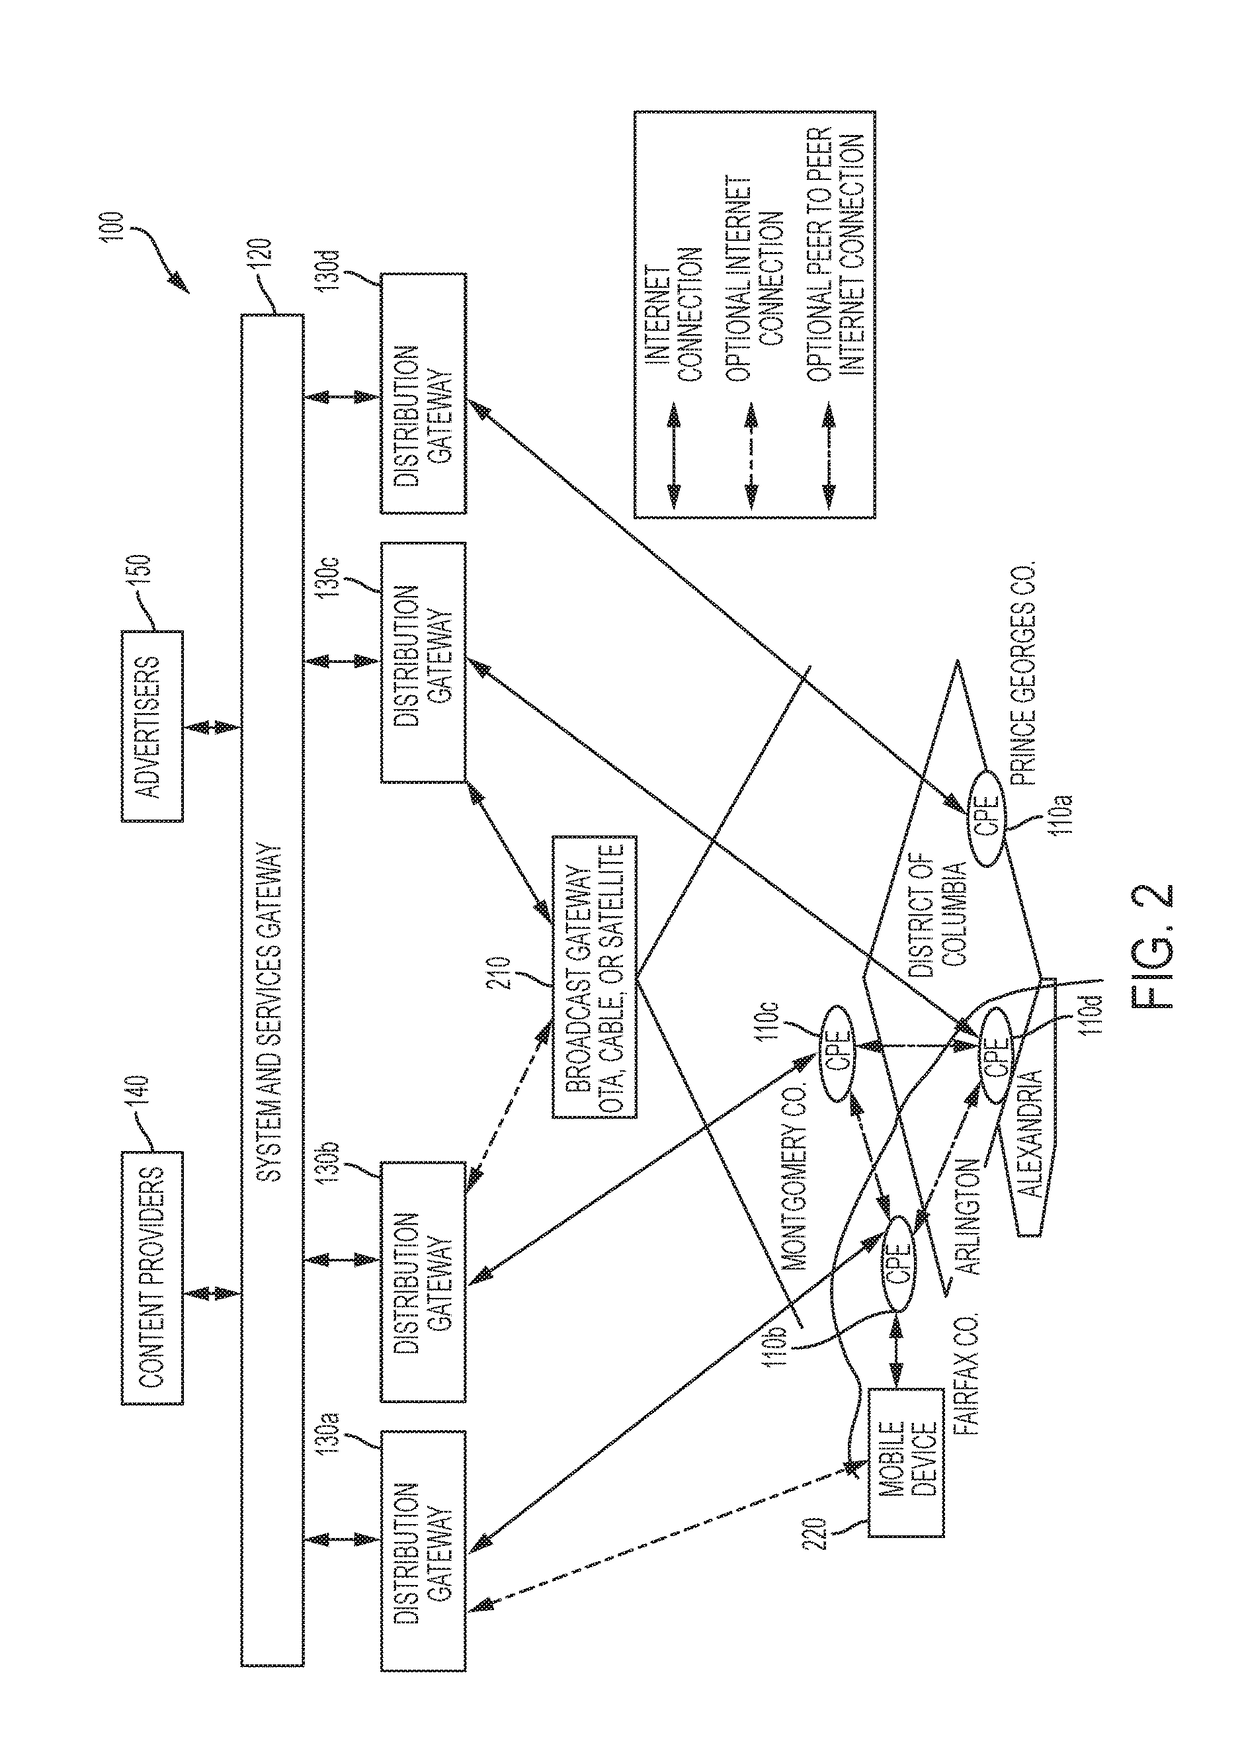 Nonlinear manifold clustering to determine a recommendation of multimedia content